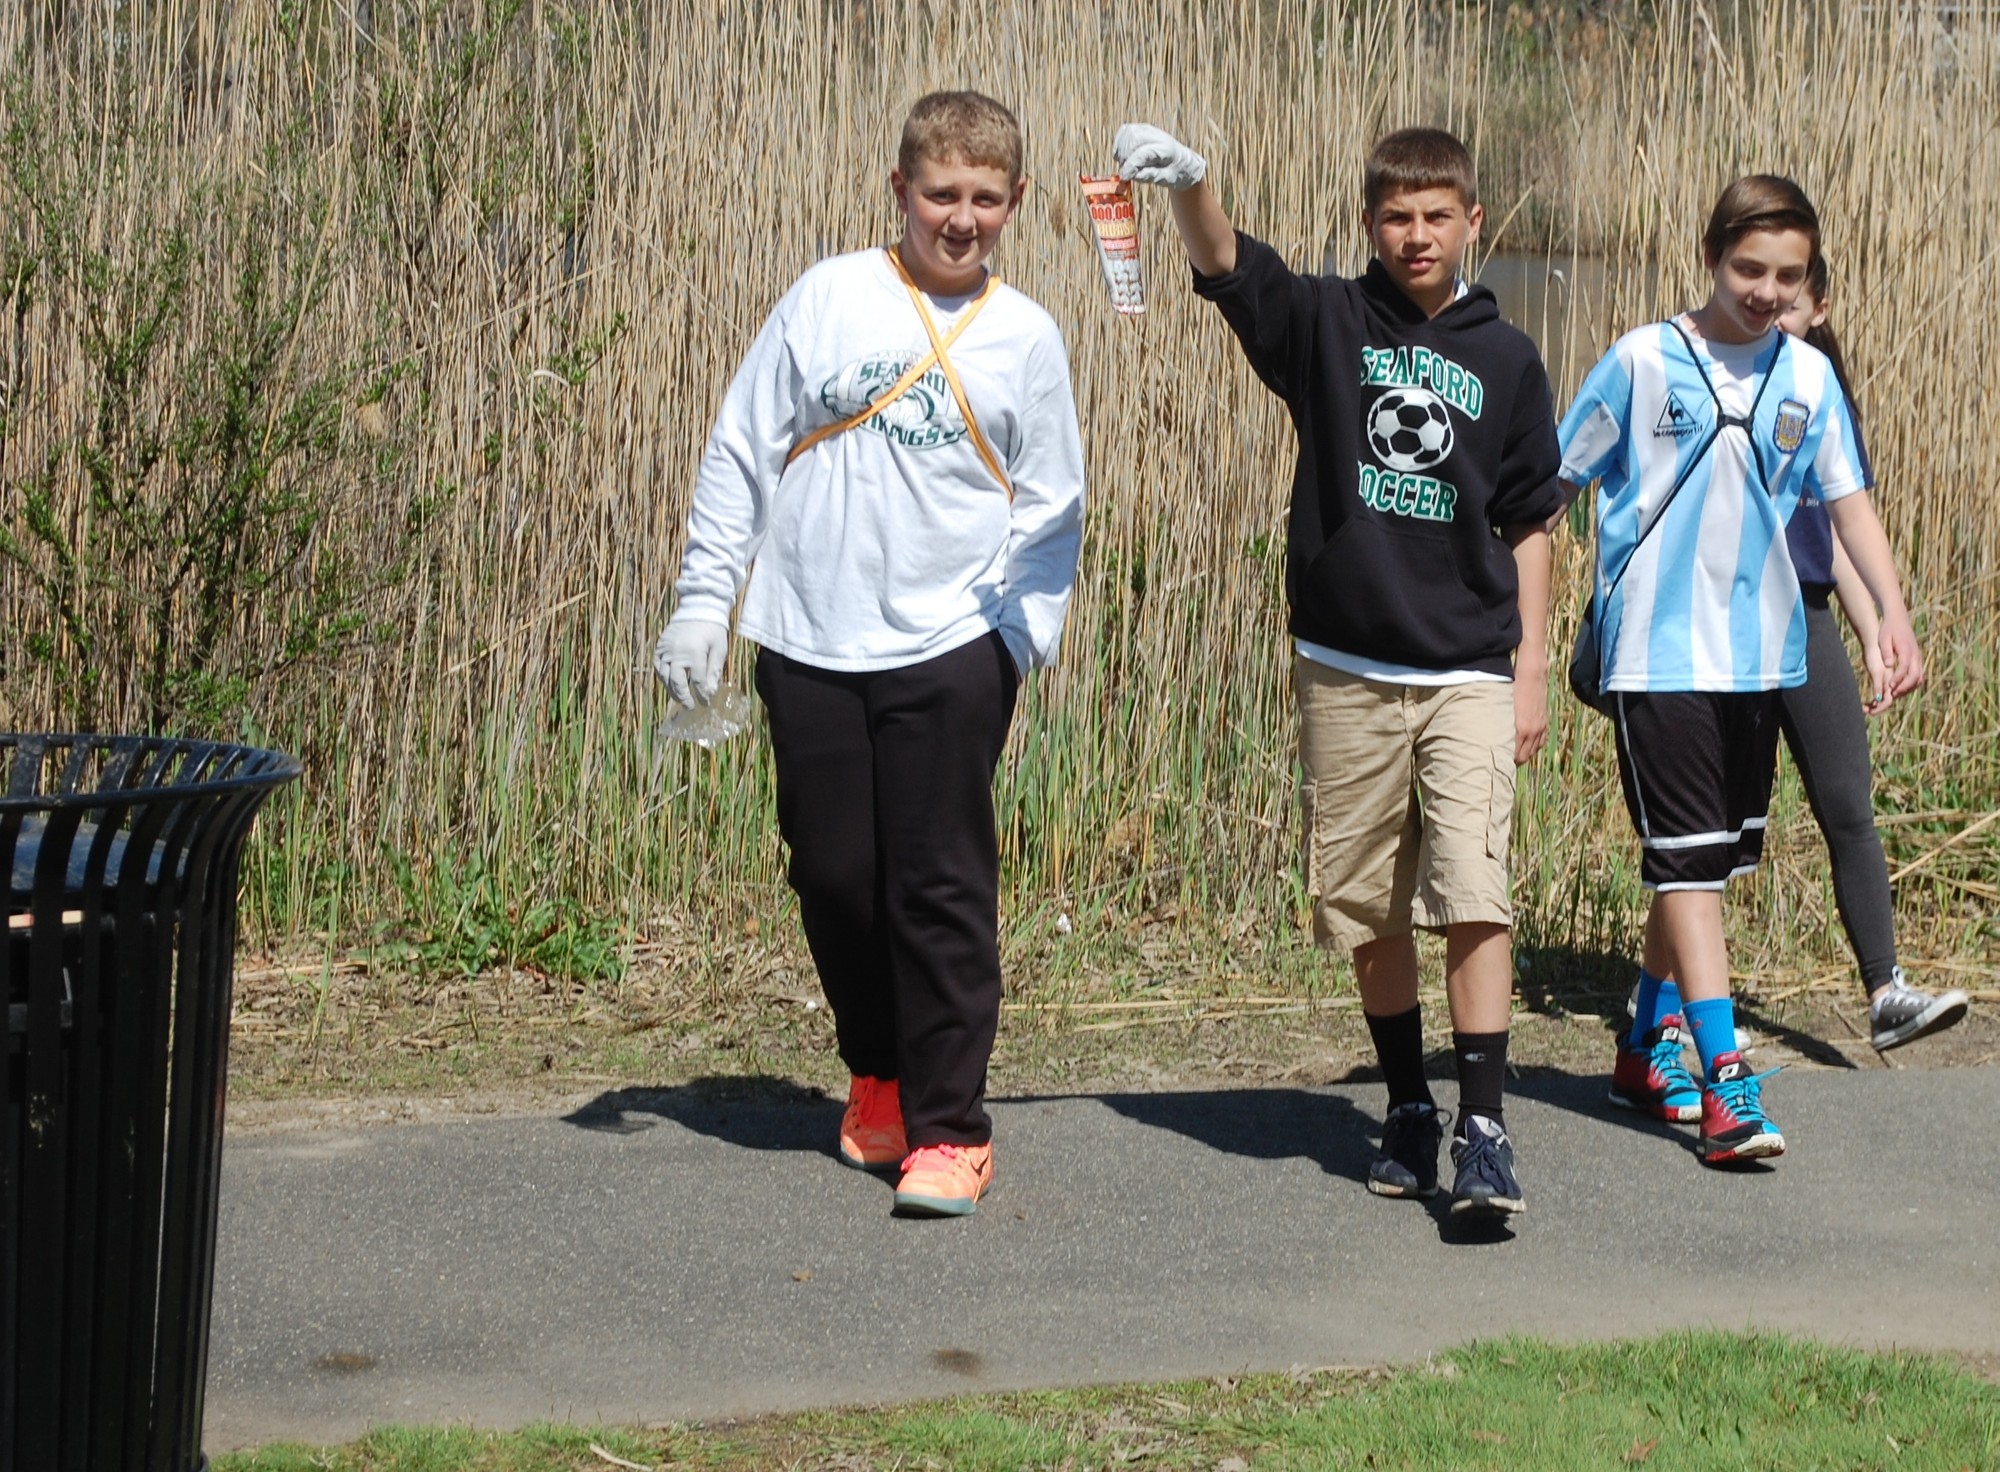 Mark Armano, center, emerged from the brush with his classmates with some garbage they found.